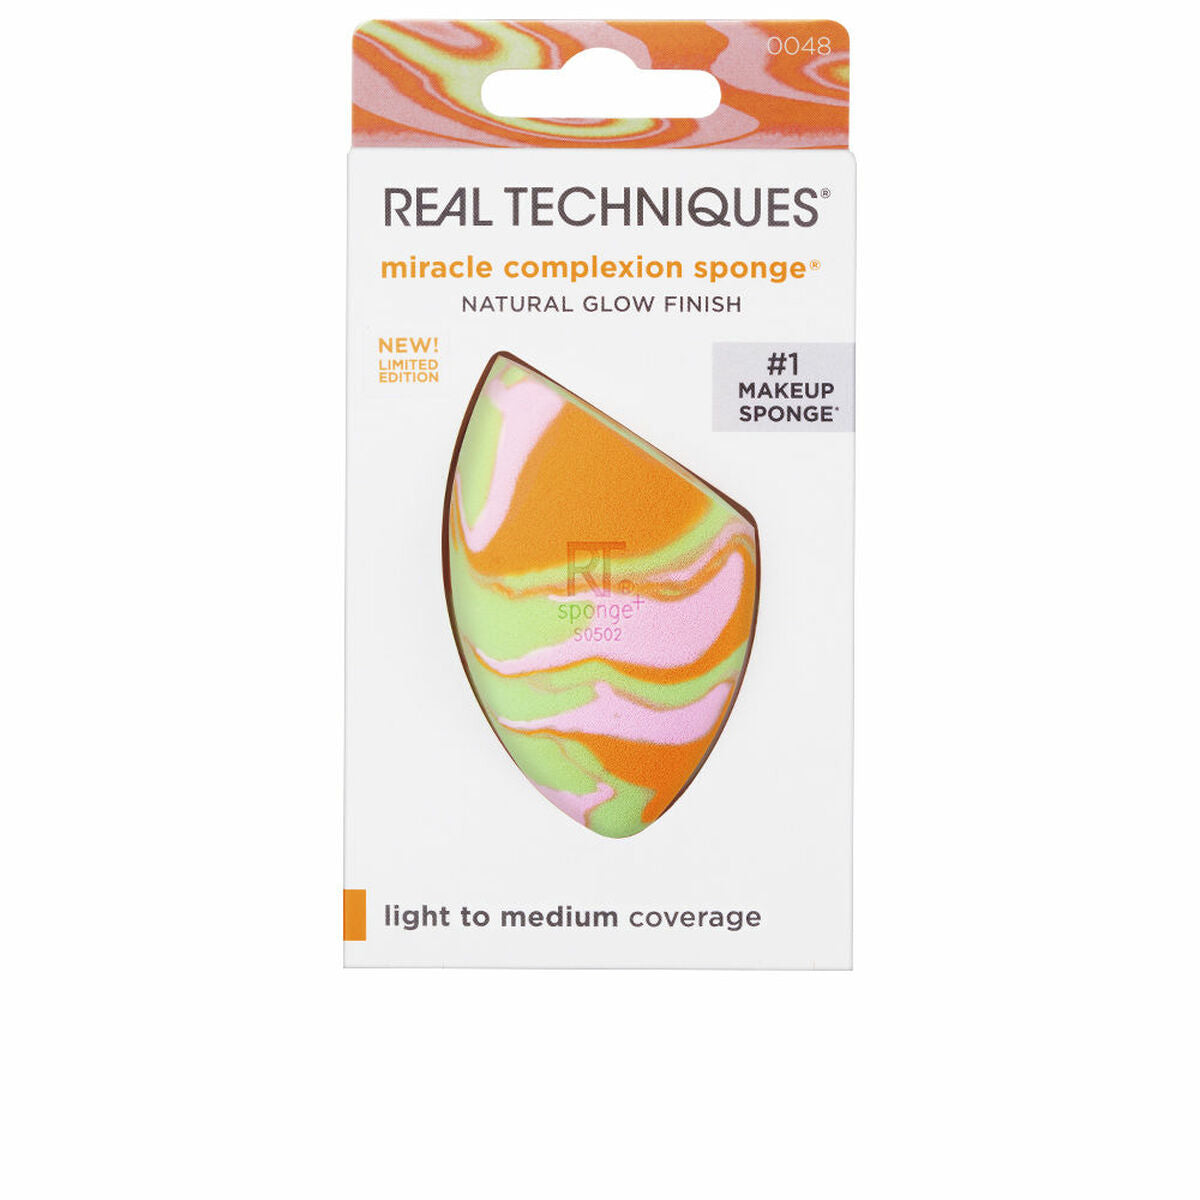 Make-up Sponge Real Techniques Miracle Complexion Limited edition-0